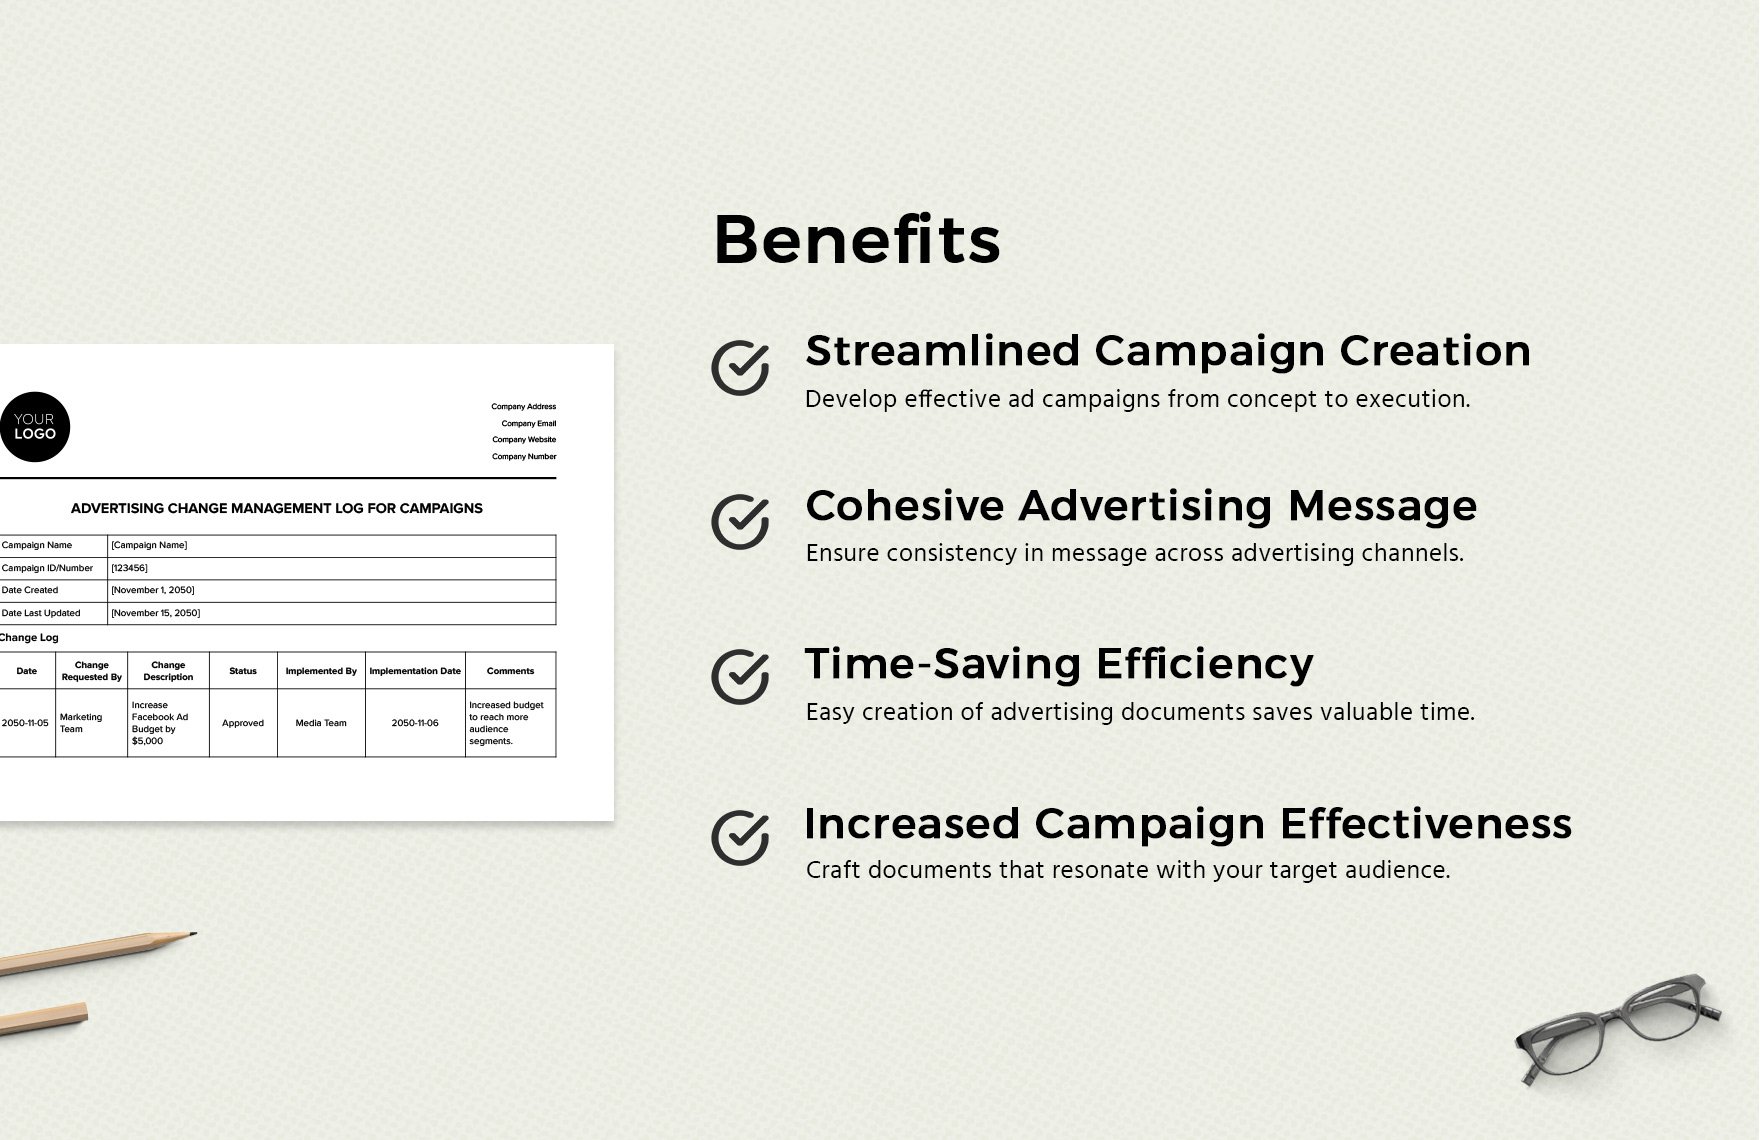 Advertising Change Management Log for Campaigns Template